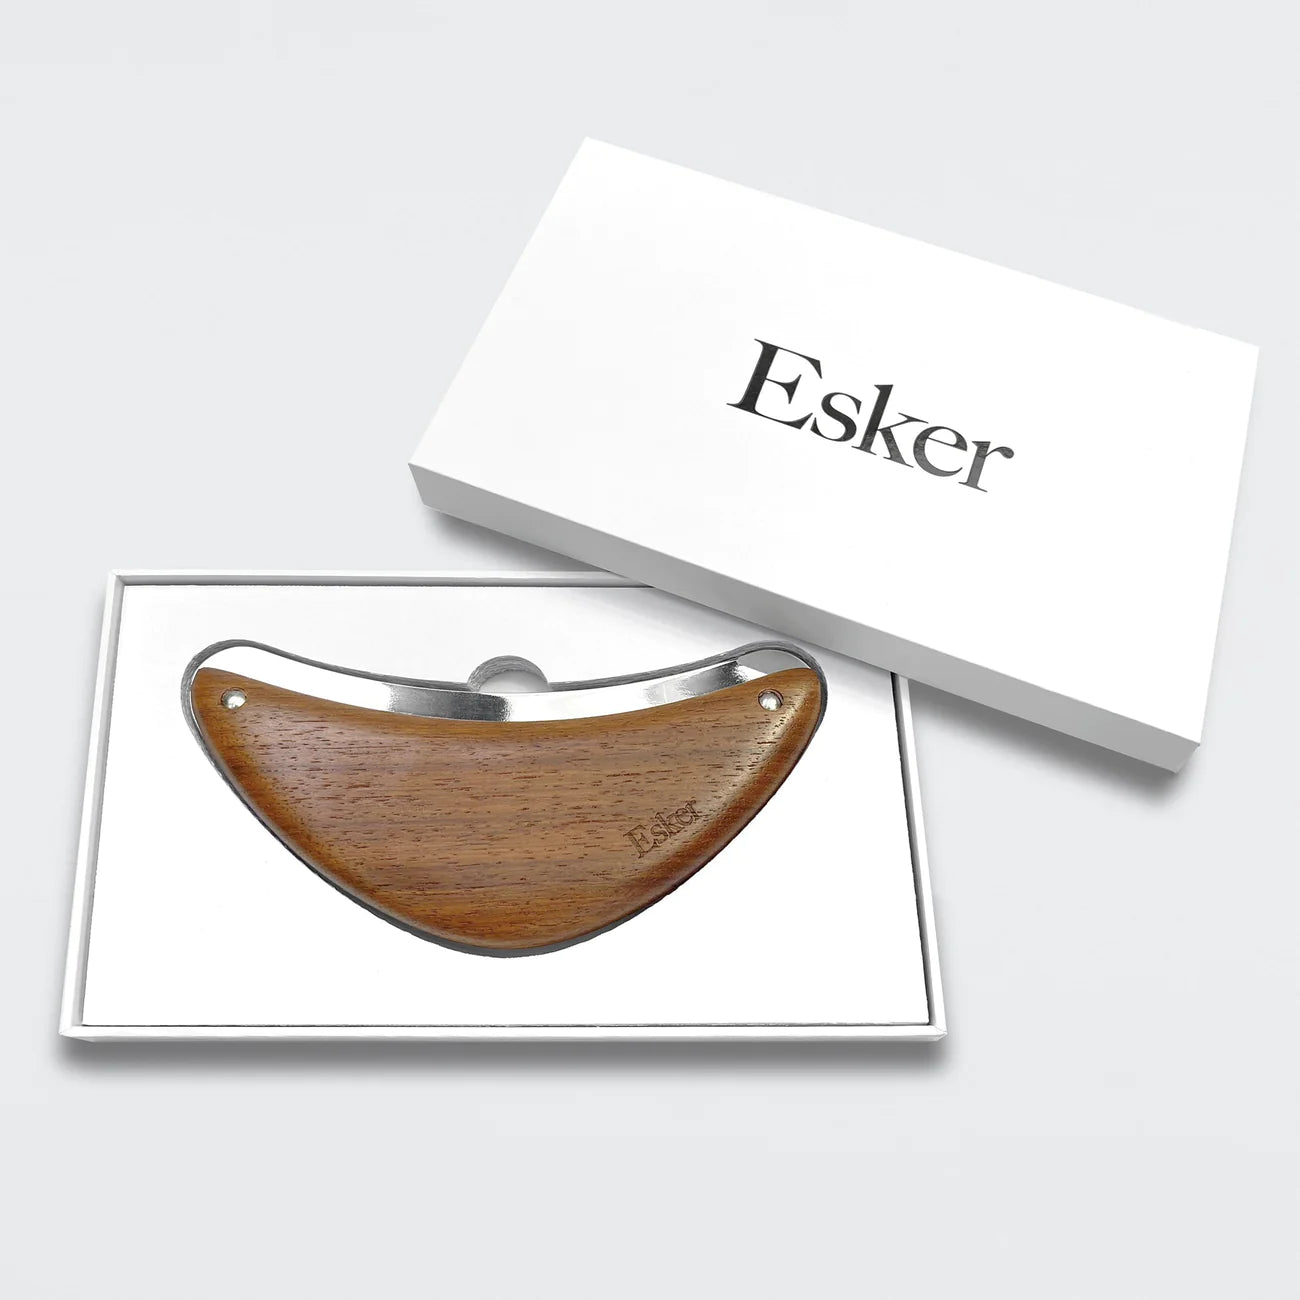 Load image into Gallery viewer, Esker Body Plane
